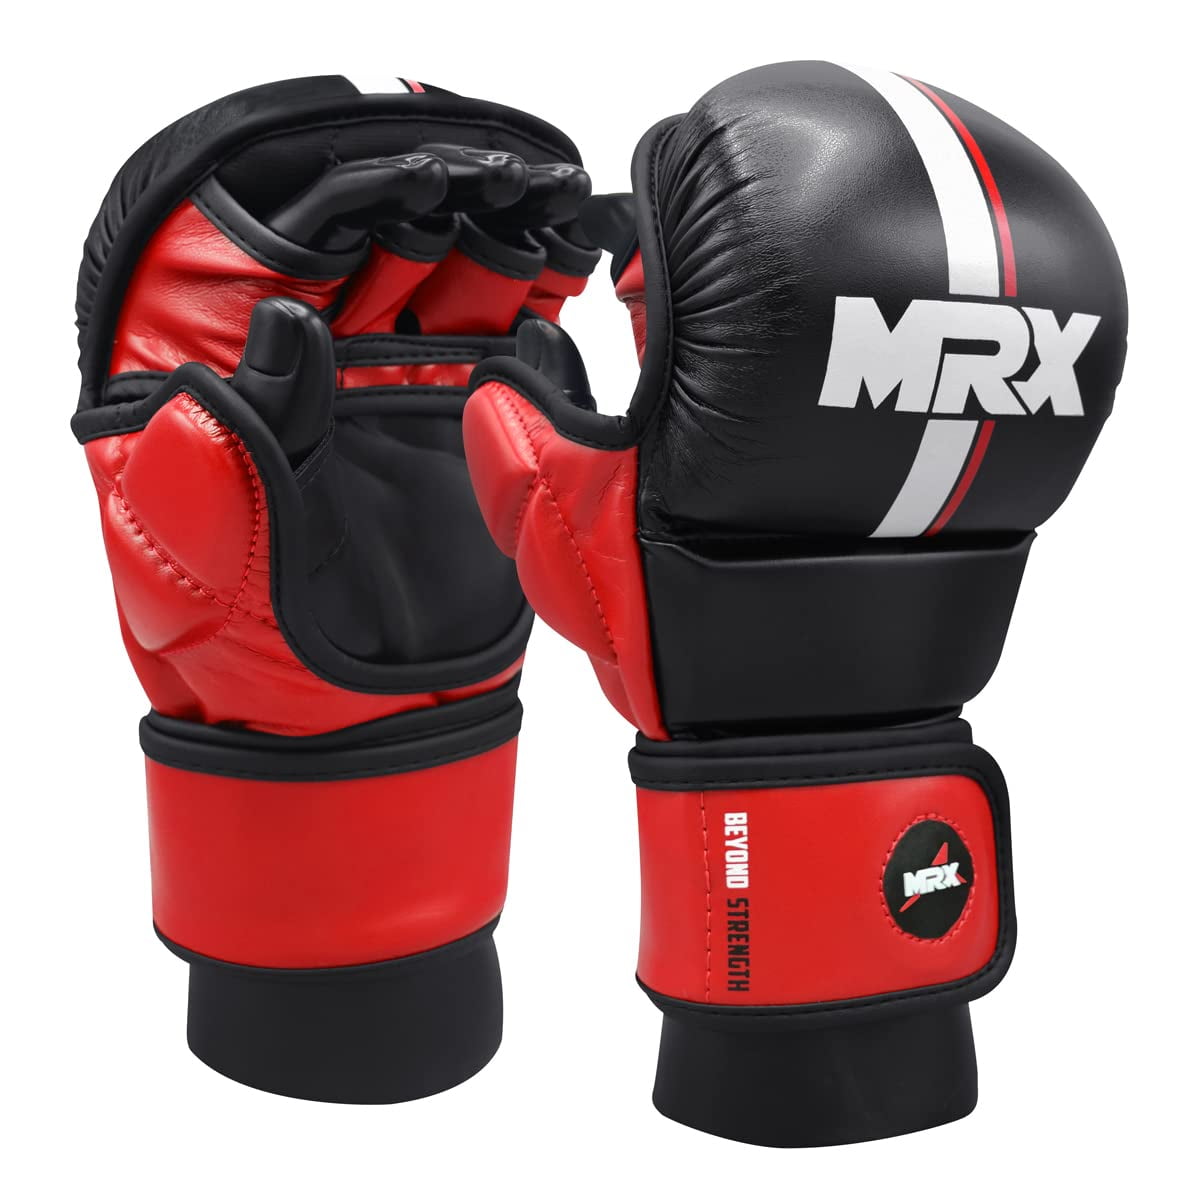 Sparring Punching Bag MMA Martial Arts Gloves Grappling Cage Fighting Mitt 